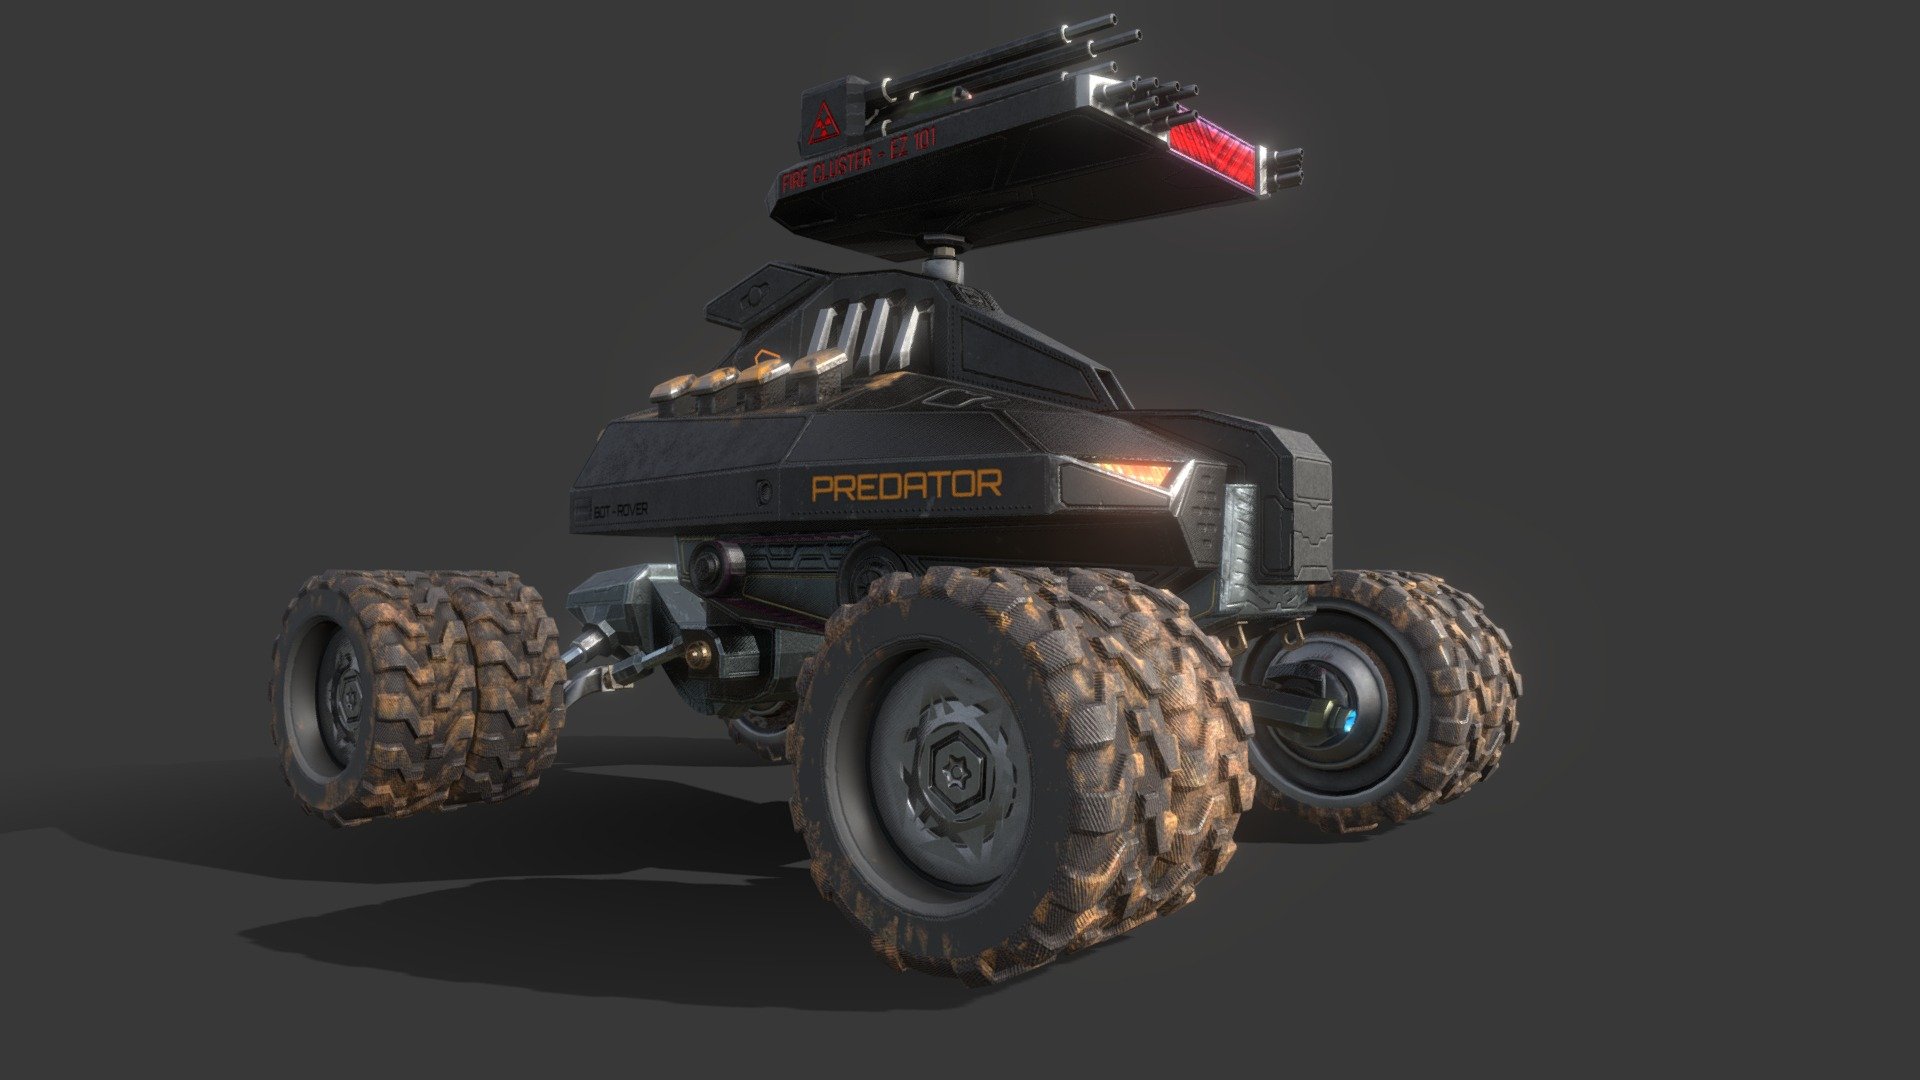 **PREDATOR BOT ROVER

This Predator BOT ROVER is ready to be used in any game development purpose or comercial / personal production use and FILM VFX

Vechicle Type:- BOT ROVER 
Vehicle Model: SCORPION STINGER
Vehicle Name: Predator
Vechicle Tech: BOT ROVER TECH
Drive Train : DUAL BELT
Weapon Type : QUAD SHOT / FIRE CLUSTER EZ 101
**Designed By : Vijayasarathi

HIGH Detail Modeling and Texturing done For Game Integration / film production , Geometries are seperable Materials and Textures

Meshes can be seperated and rigged according to your requirements of your projects

THis Predator BOT ROVER Can Be can be used FPS/TPS Style Games (Ease of USe) and for Sci- Fi Movie Production

**Please Give Your Valuable Feedback After Downloading and Hit the Like if you Do..! - PredatorBotRover - Buy Royalty Free 3D model by Vijaysarathi (@vjprojects2020) 3d model